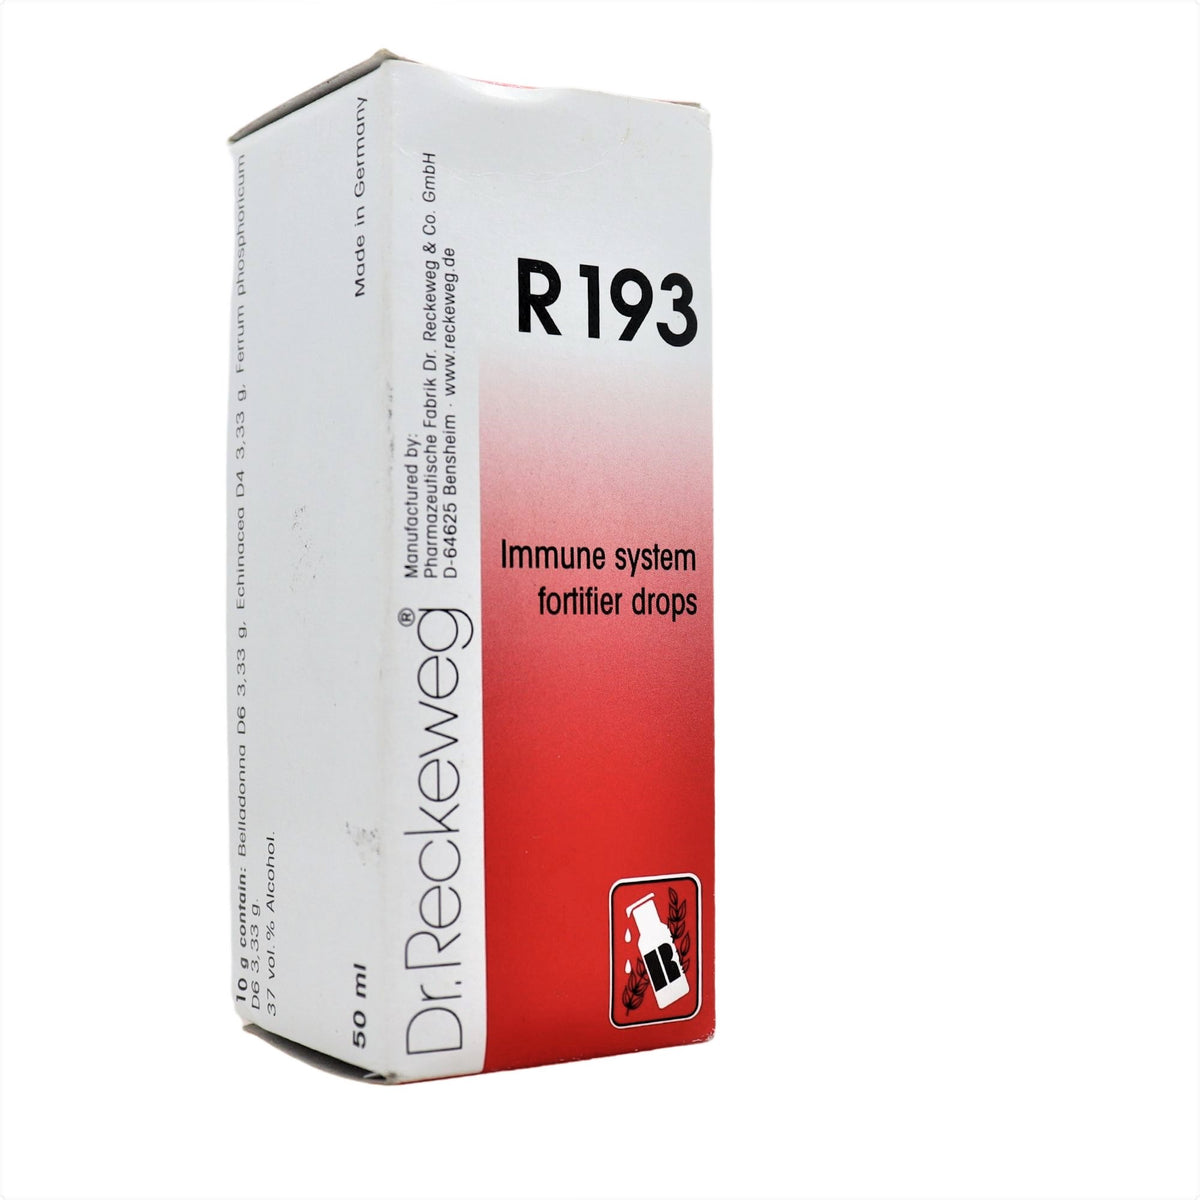 R-193 (Immune System Fortifier Drops)